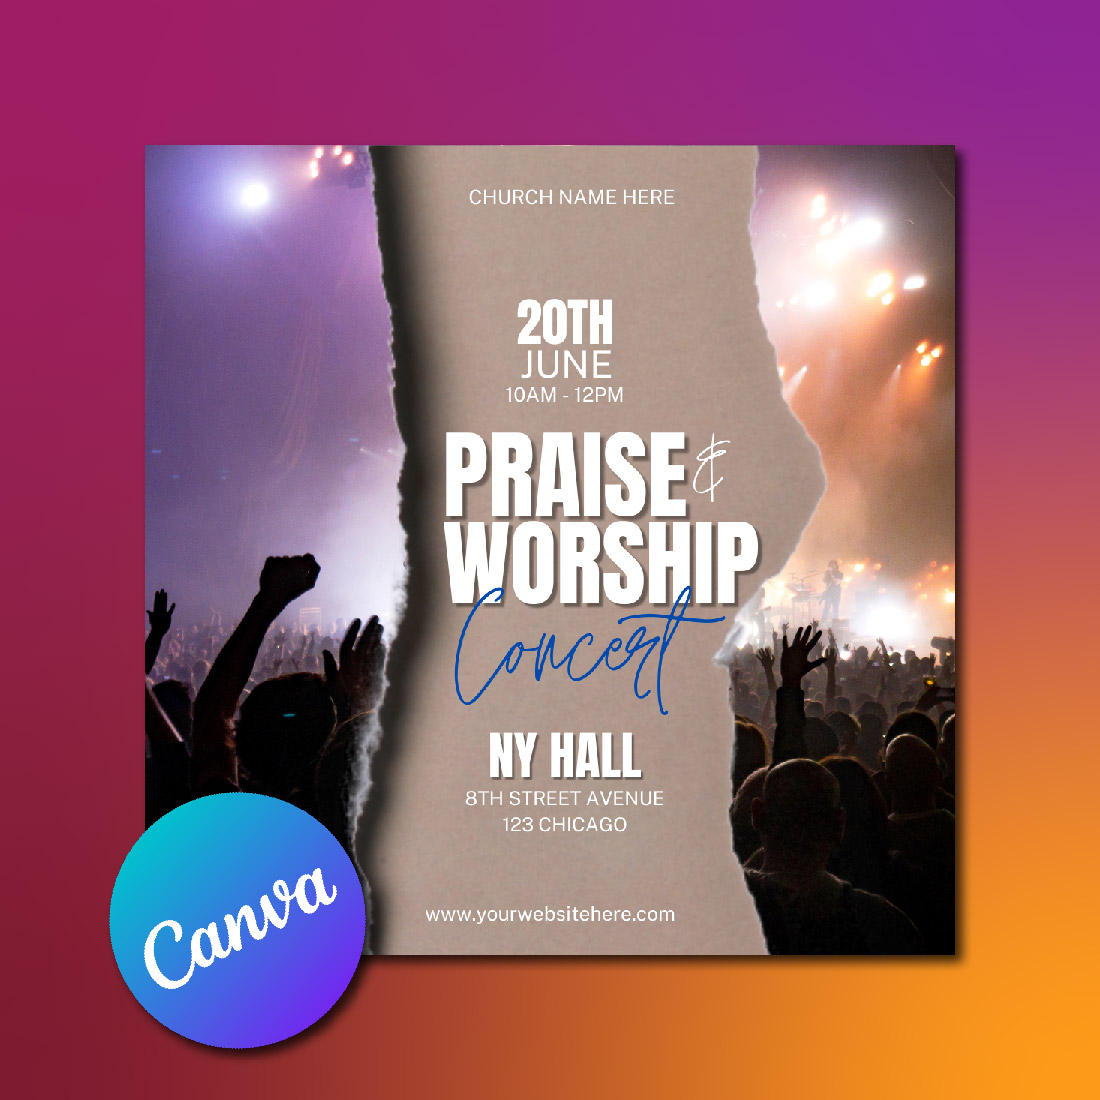 PRAISE AND WORSHIP CANVA TEMPLATE cover image.